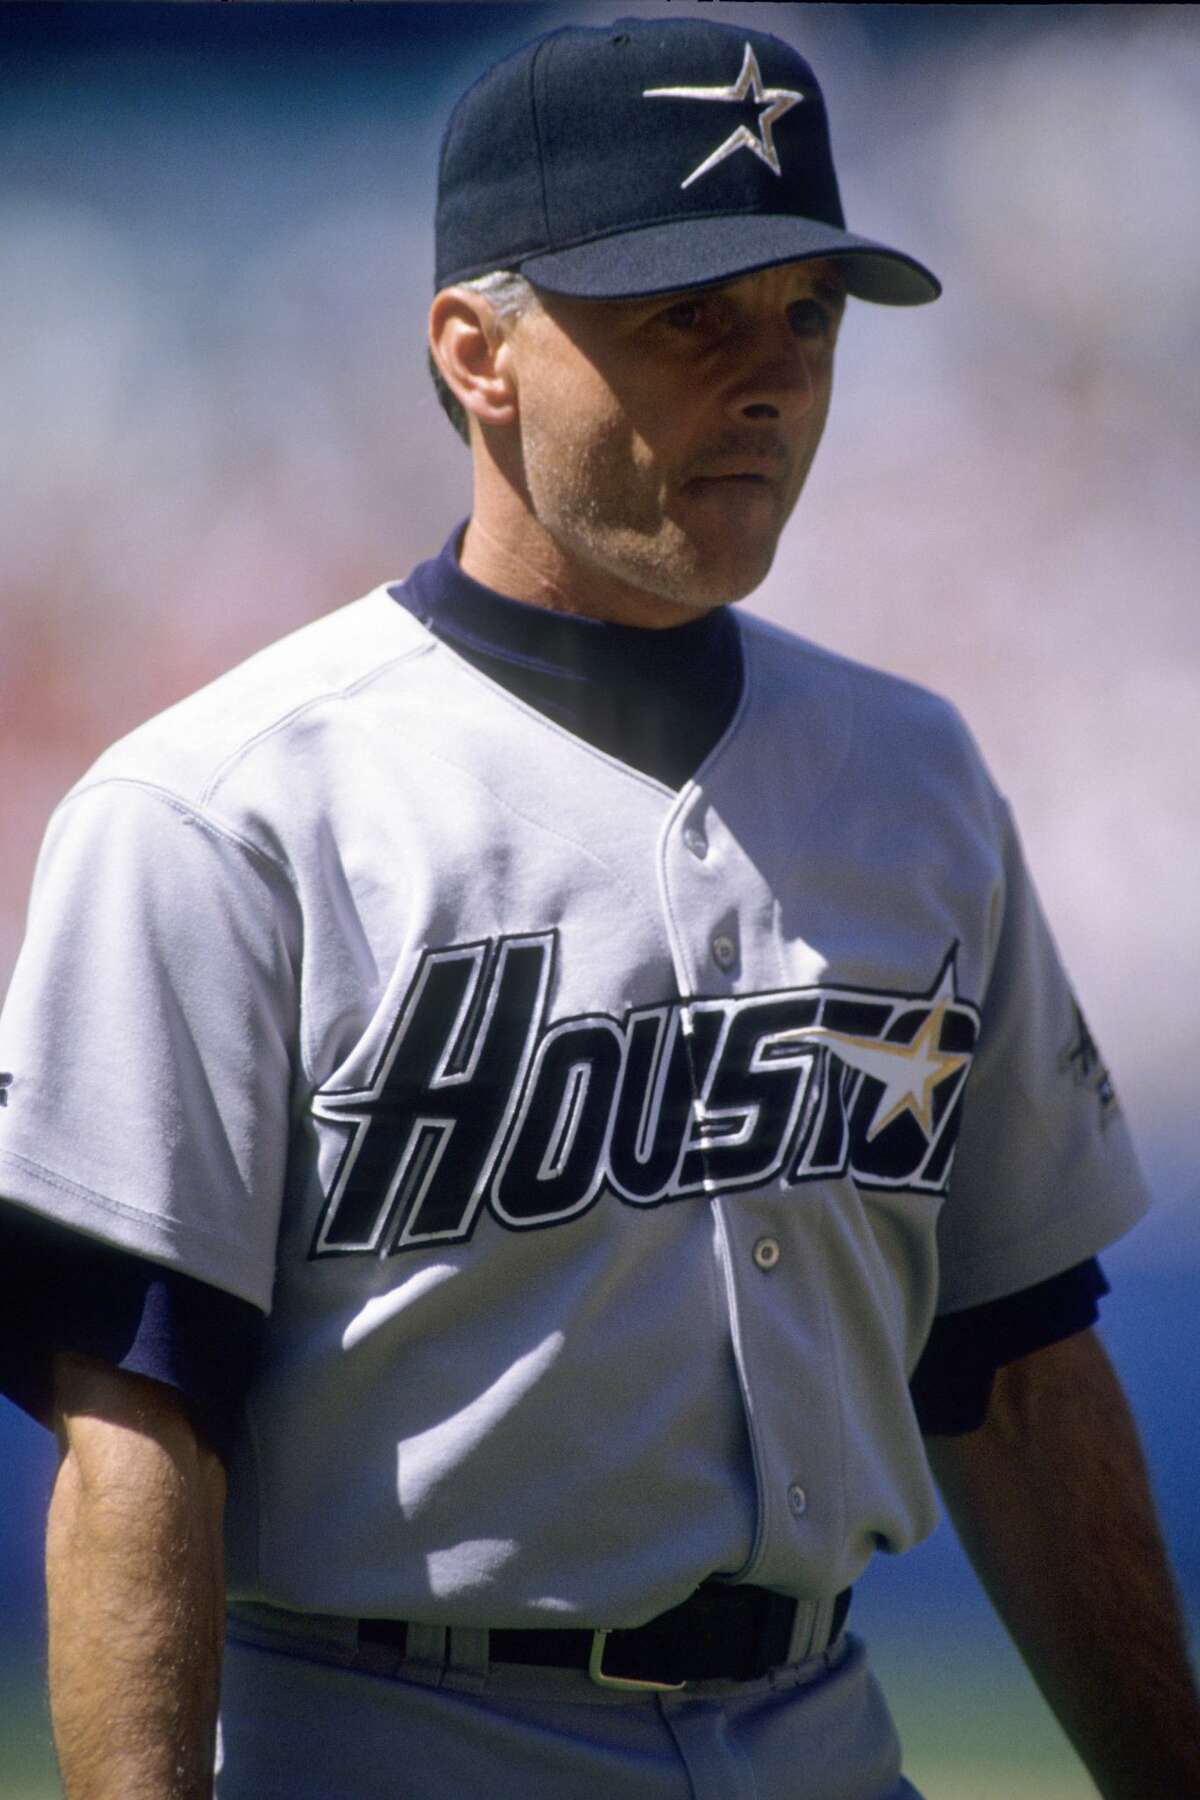 T11 youngest: Terry Collins, Astros Age: 45 Season: 1995